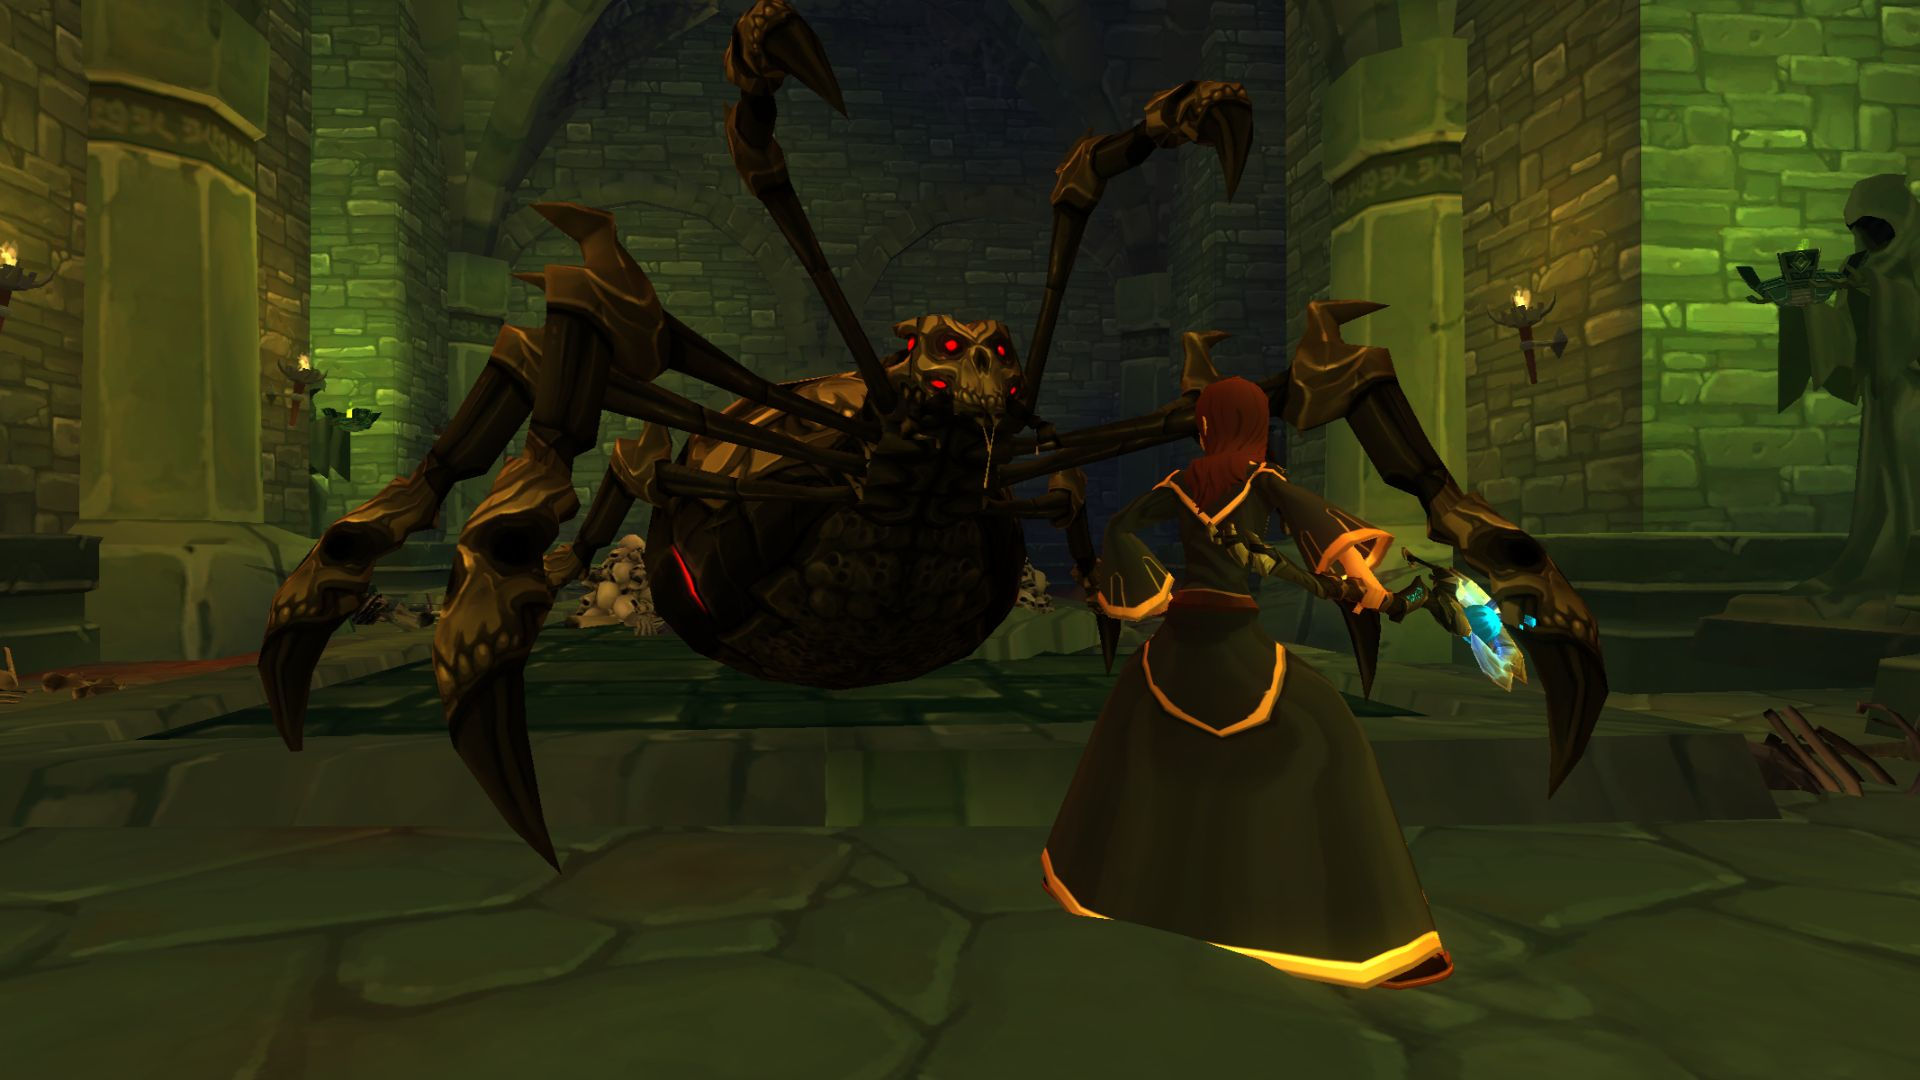 Best mobile MMORPGs: Adventure Quest 3D. Image shows a mage about to battle a giant spider with a skull-like head.